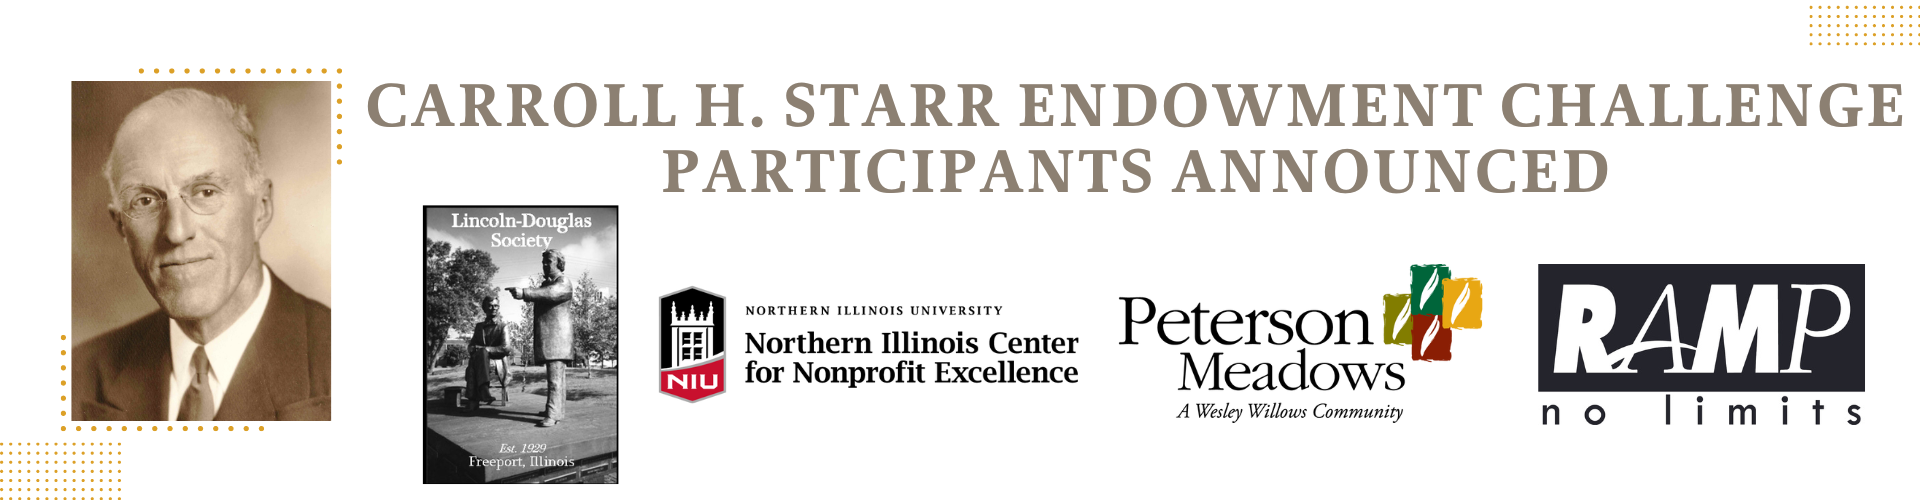 Text reads: announcing the Carroll H. Starr Endowment Challenge Participants. Sepia-tone picture of a man wearing glasses and a suit and tie. Logos for the Lincoln-Douglas Society, Northern Illinois Center for Nonprofit Excellence, Peterson Meadows - A Wesley Willows Community, RAMP, Community Foundation of Northern Illinois